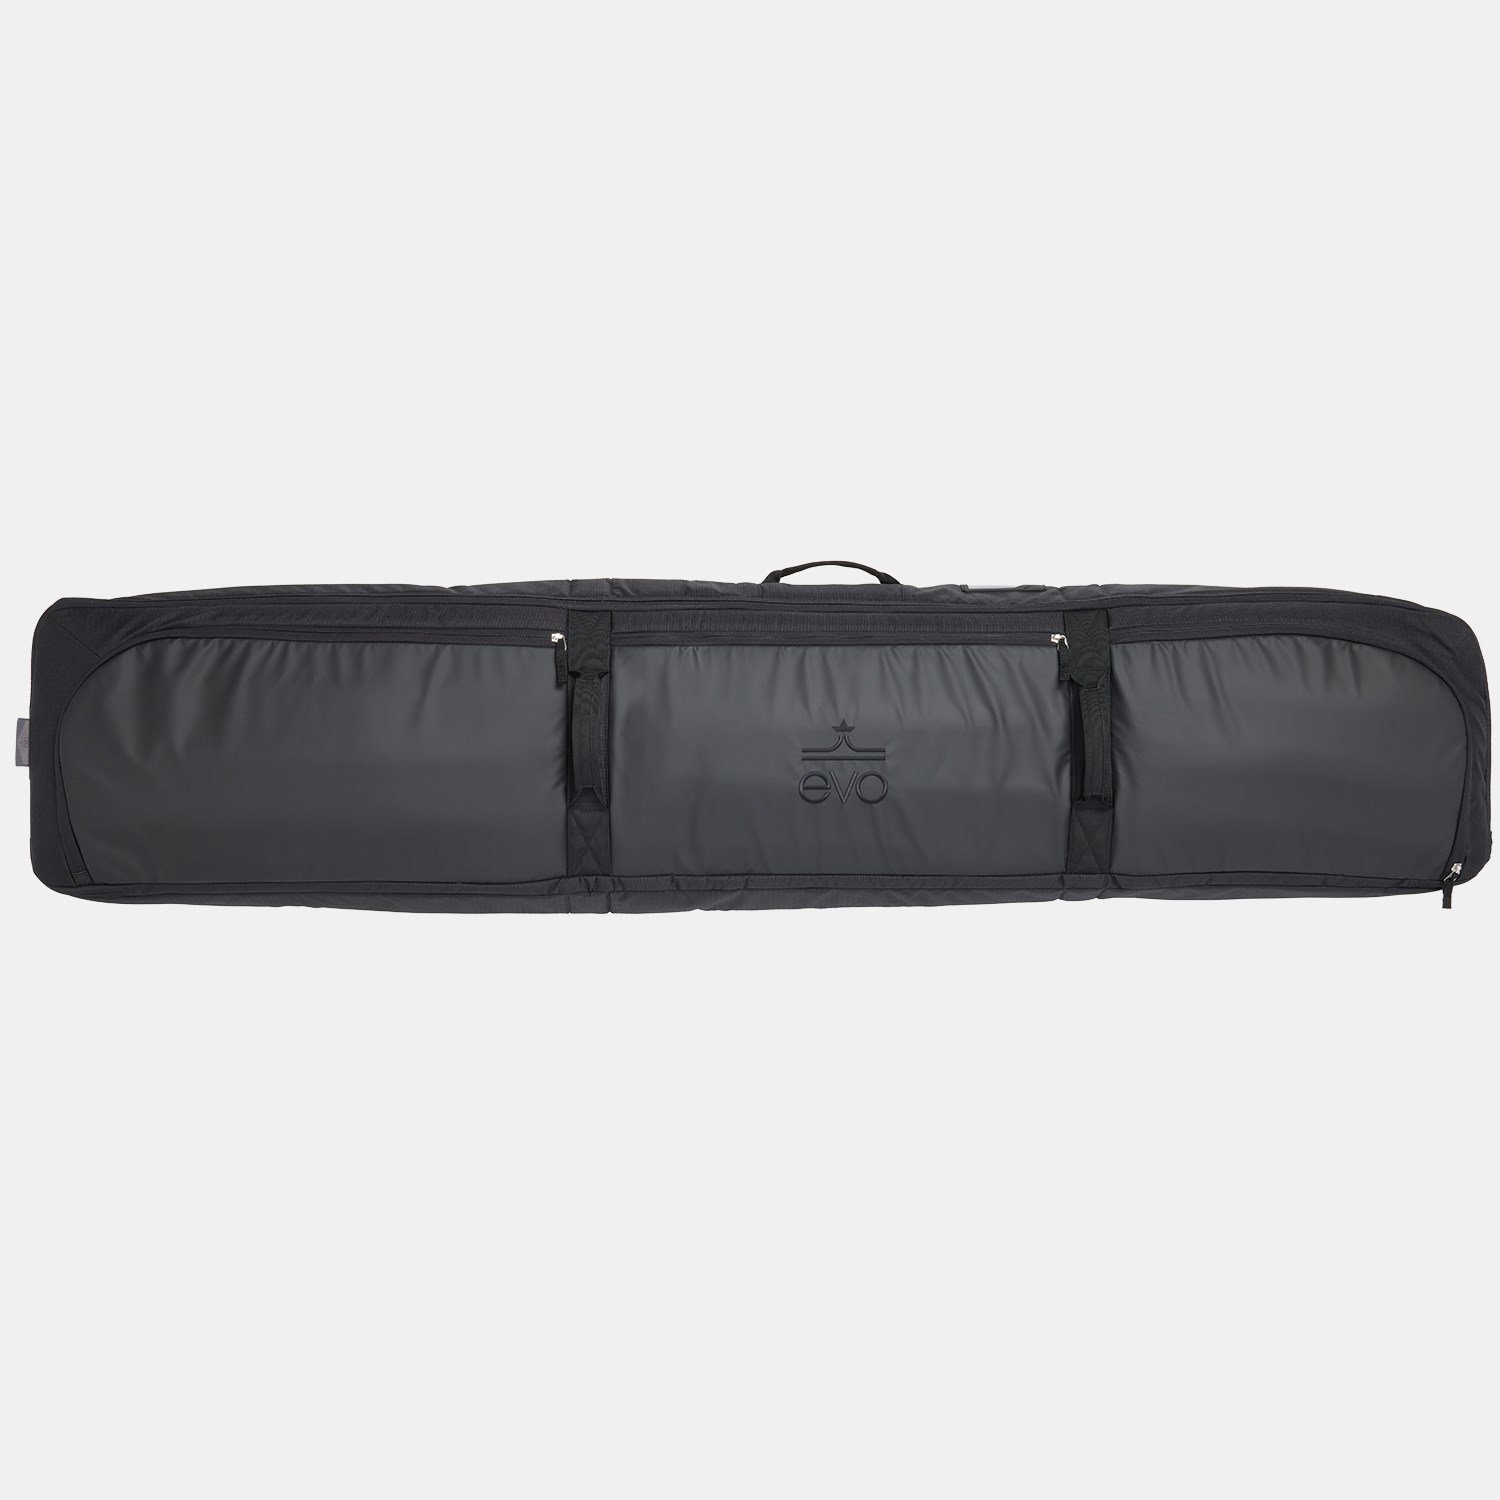 Voorman Ontbering thermometer evo Roller Snowboard Bag